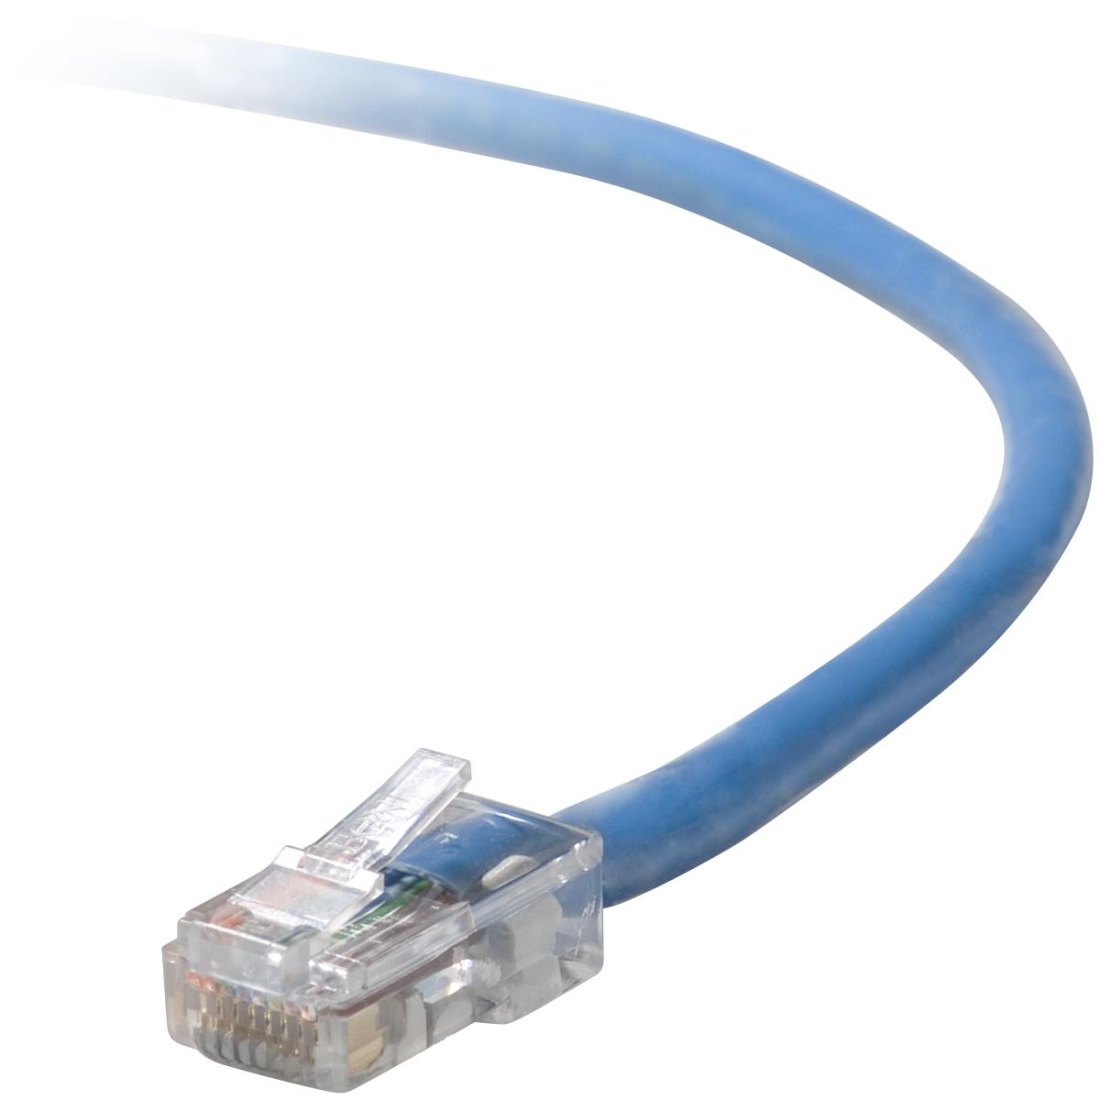 BELKIN A3L791 04 BLU S 4 ft. Cat 5E Blue UTP RJ45M/RJ45M Snagless Patch Cable